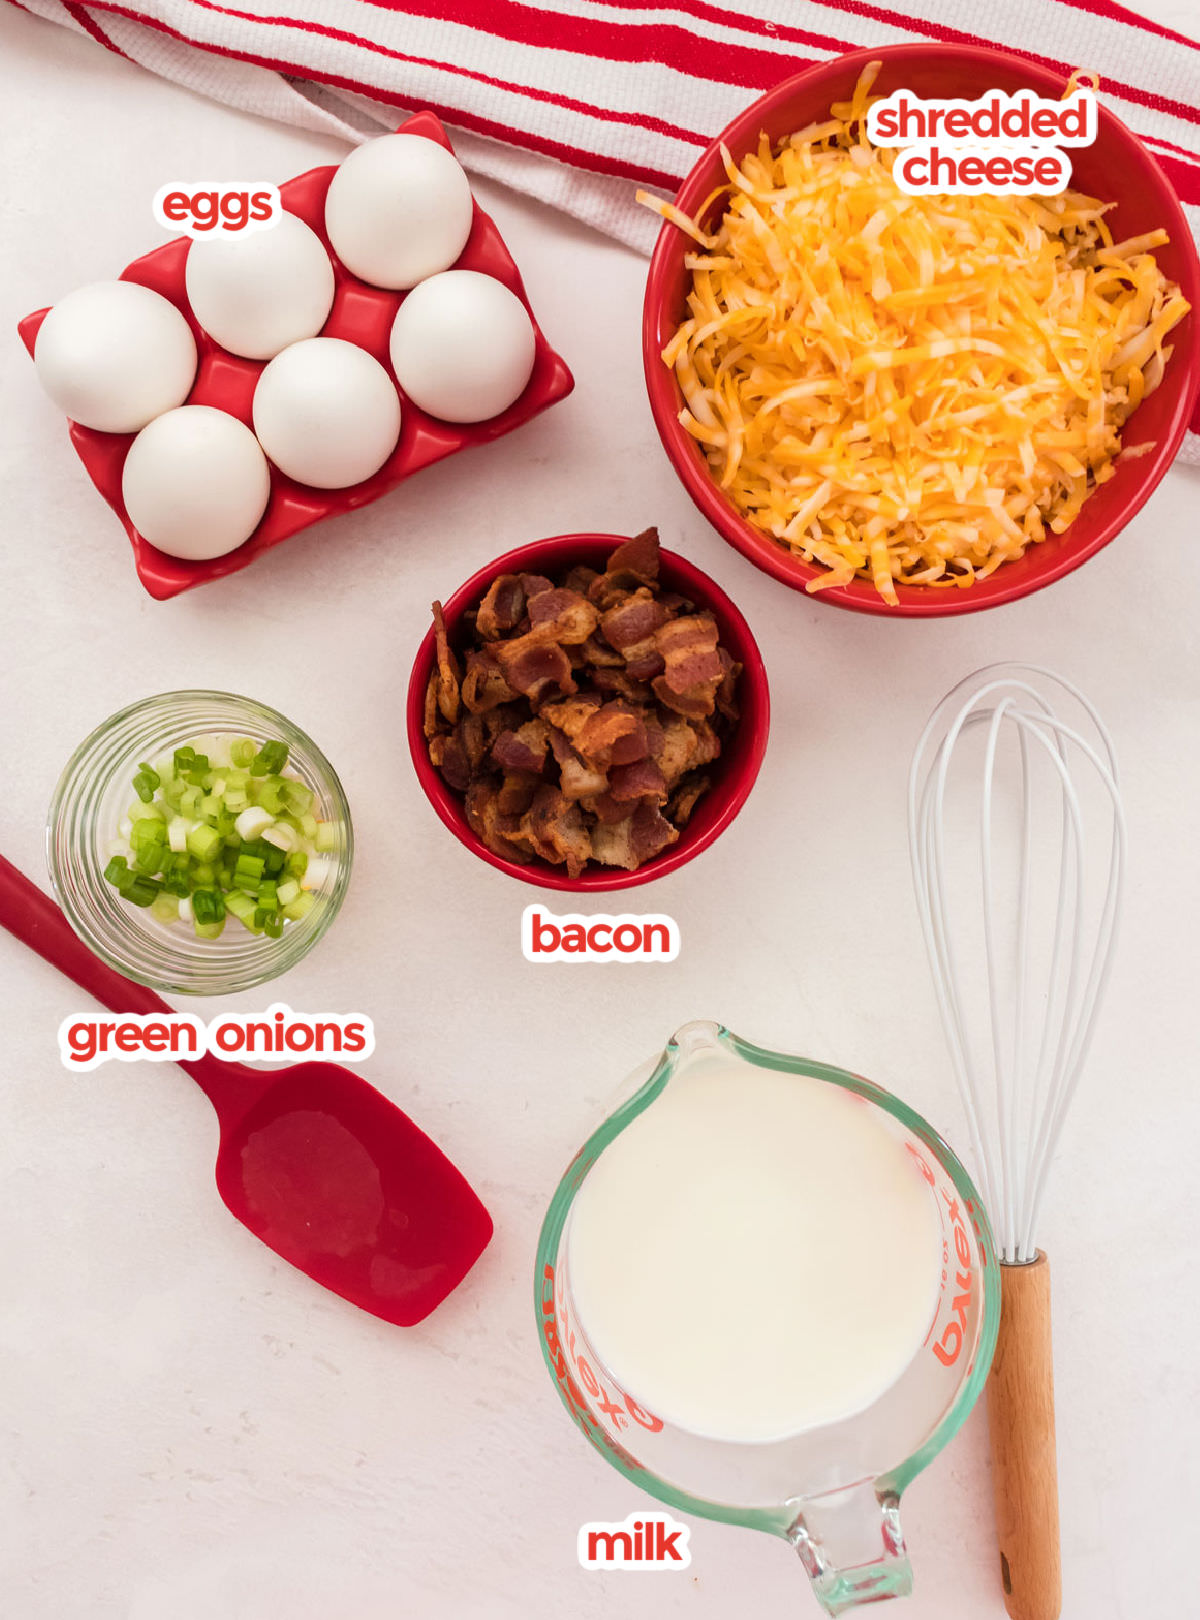 All the ingredients needed to make the Quiche including eggs, cheese, green onions, bacon and milk.